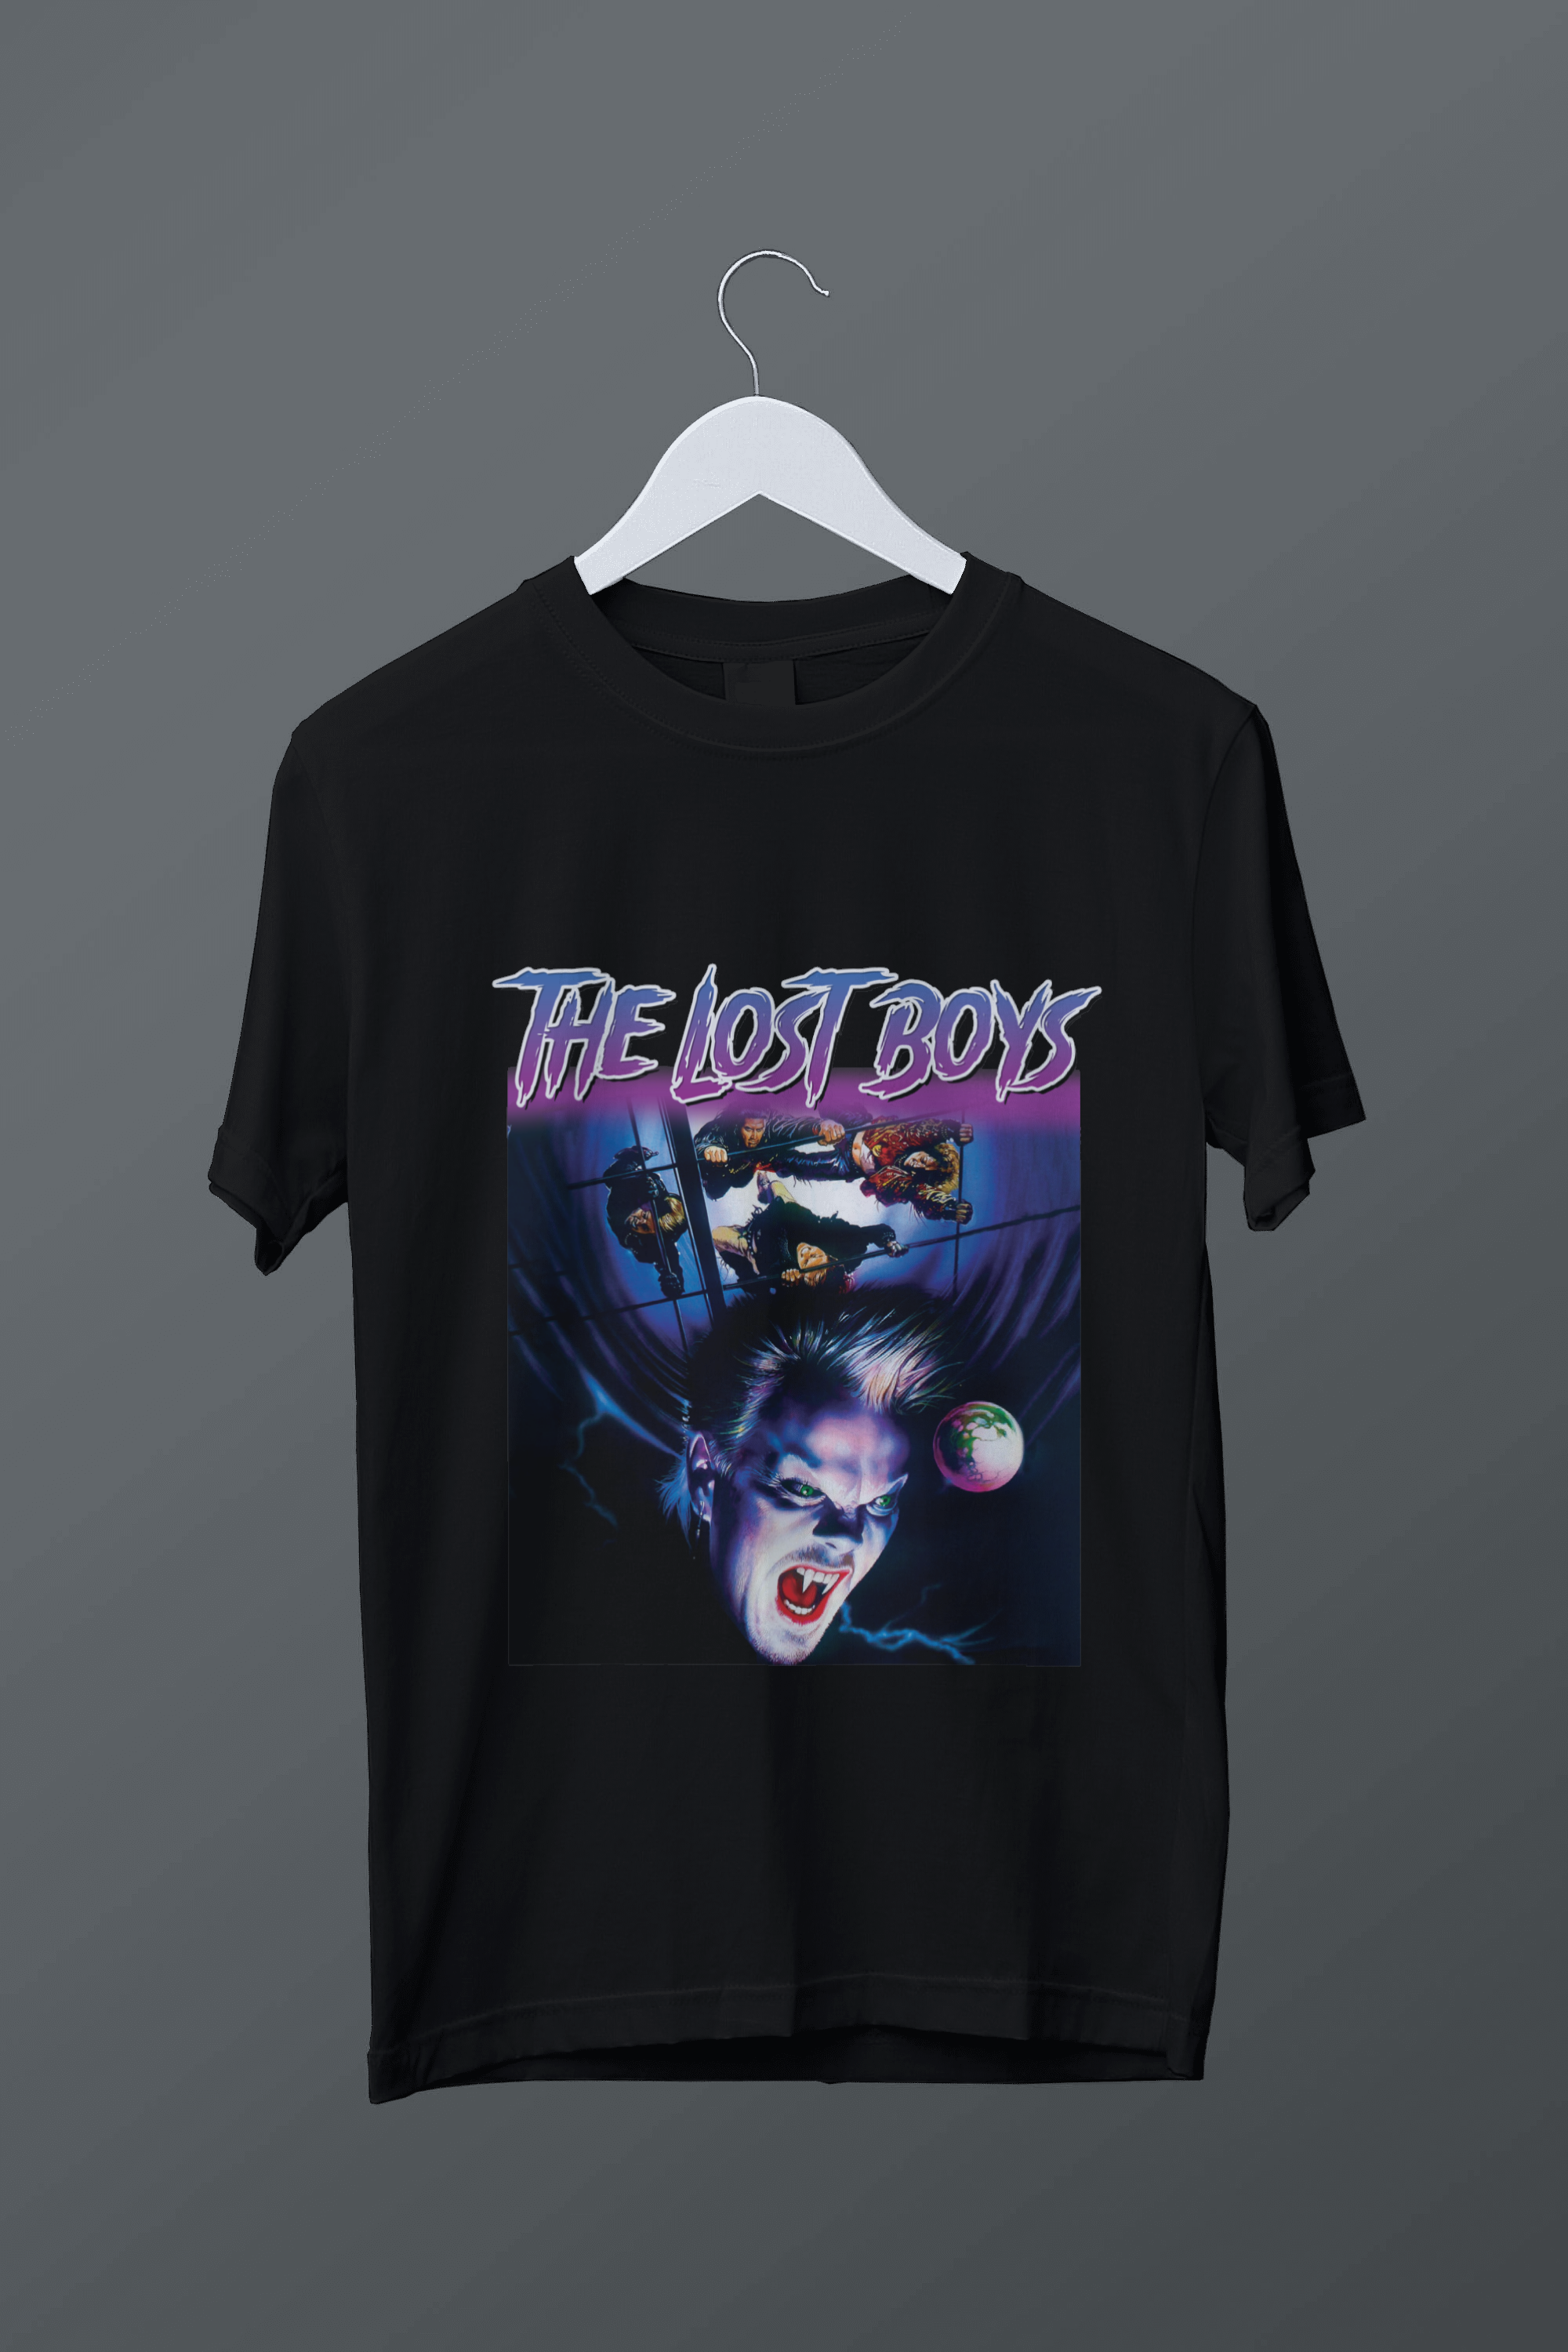 The Lost Boys - Horror Movie T-Shirt